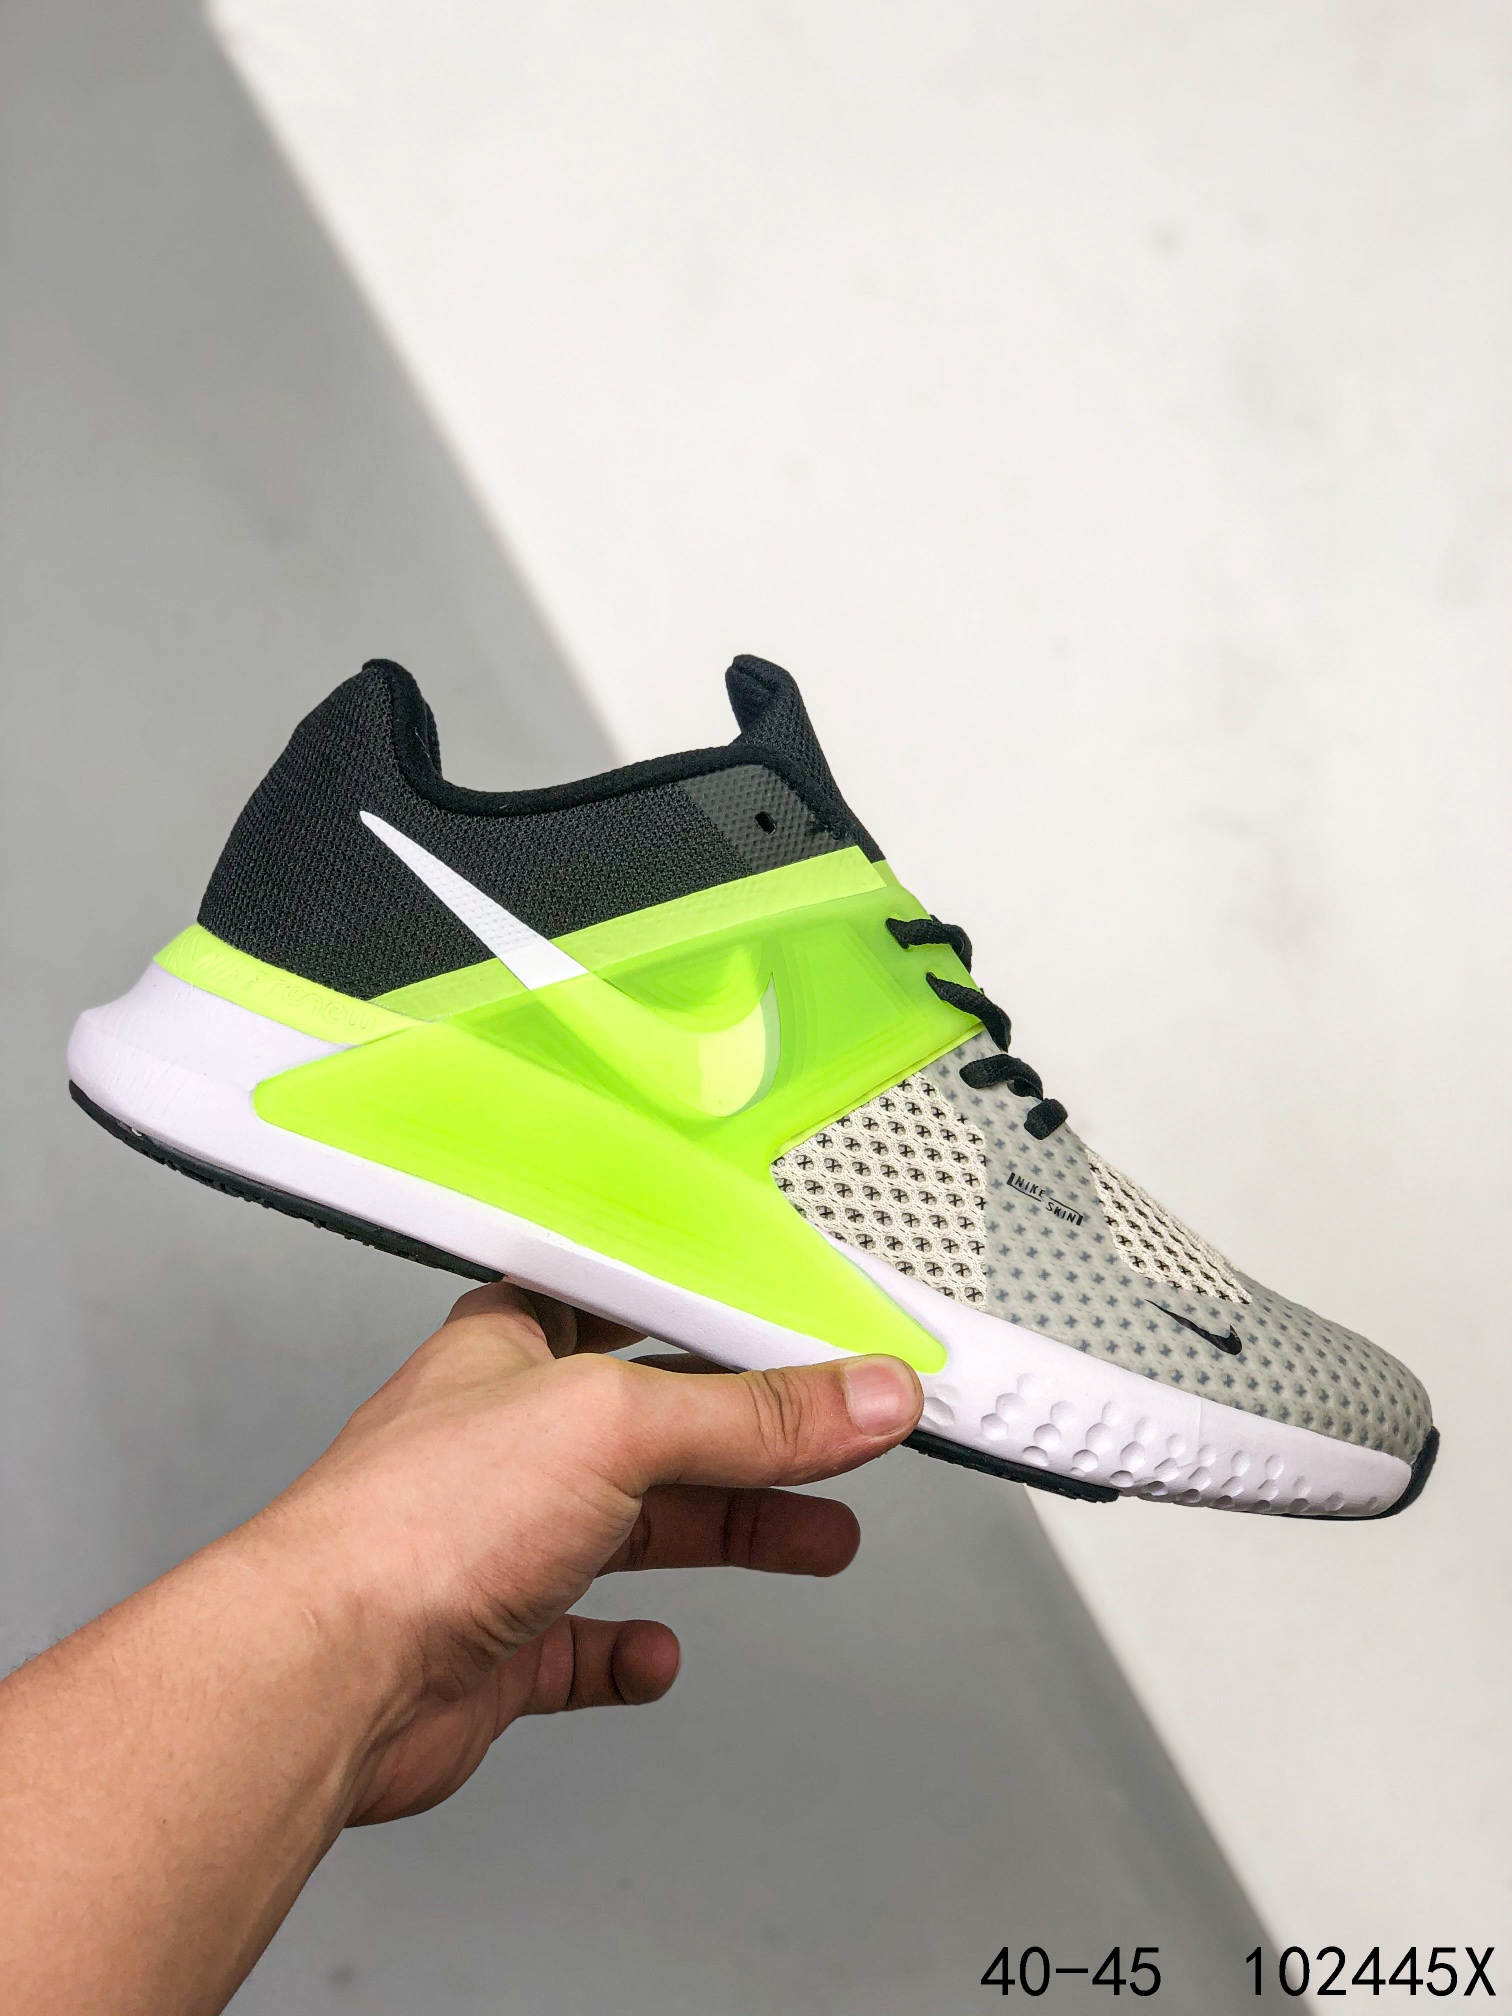 2021 Nike Air Renew Grey Fluorscent Black Running Shoes